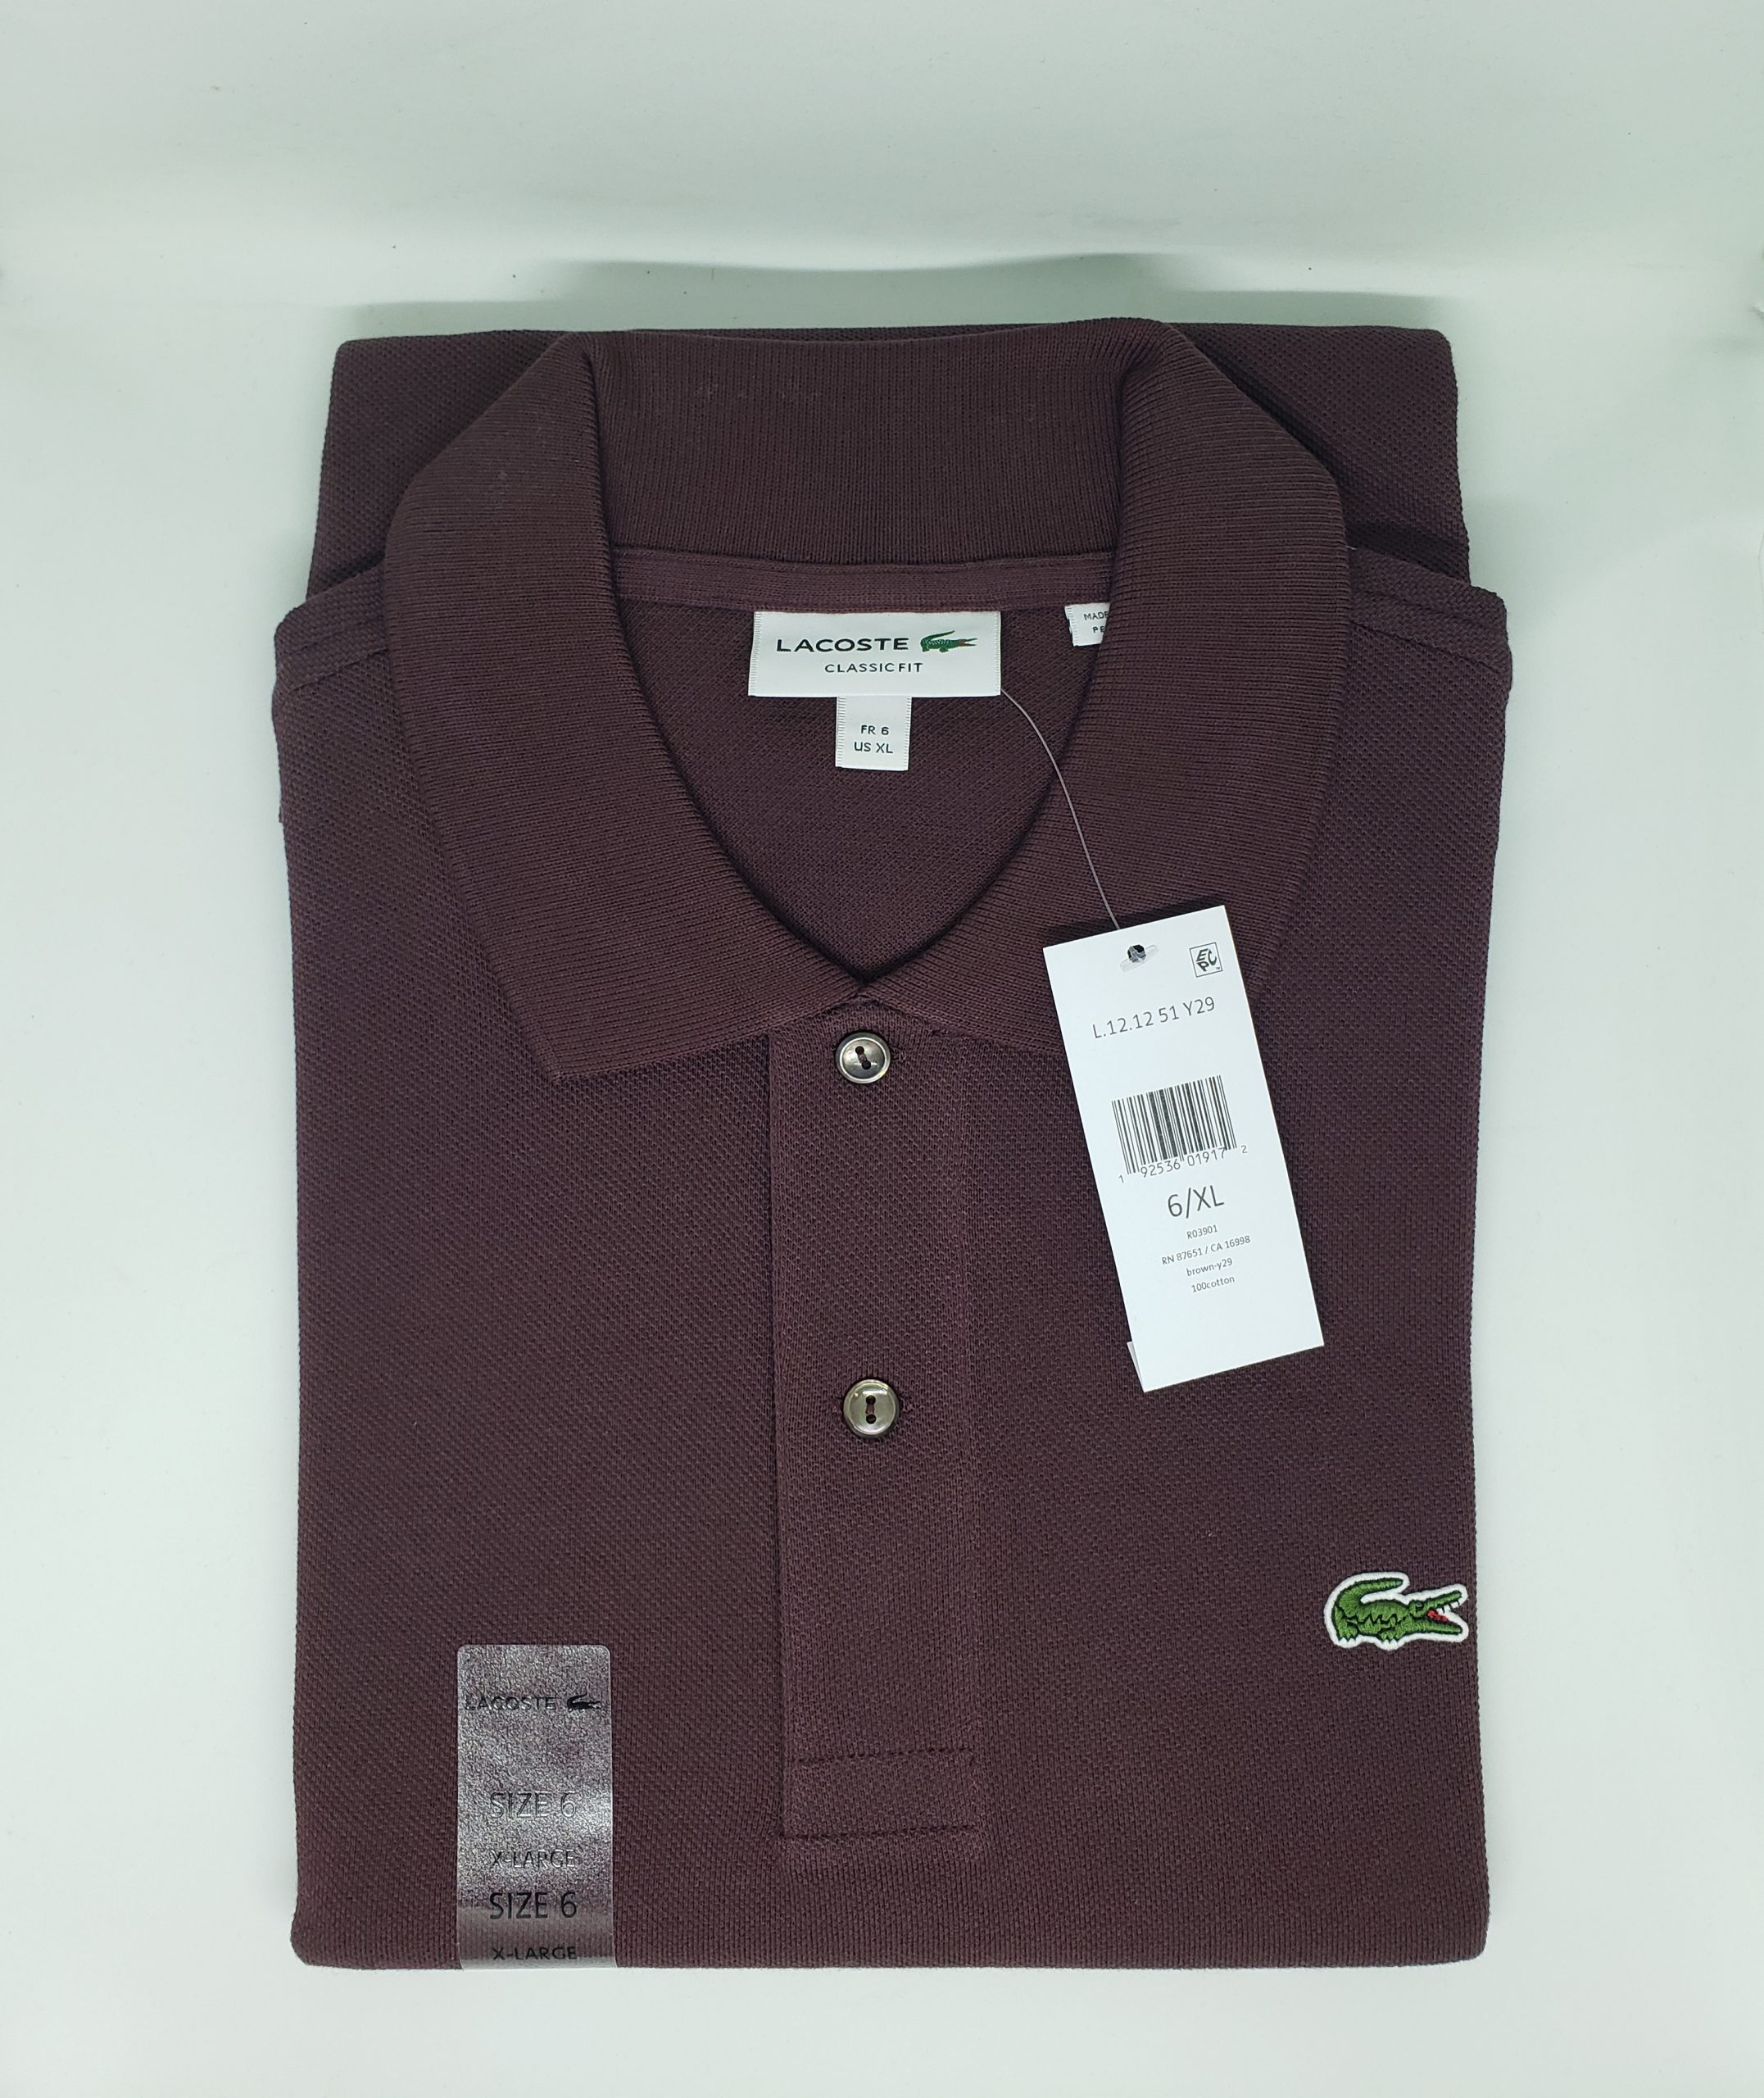 Lacoste Clasic Fit Polo Shirts 100% cotton. - SNSGIFTS4ALL